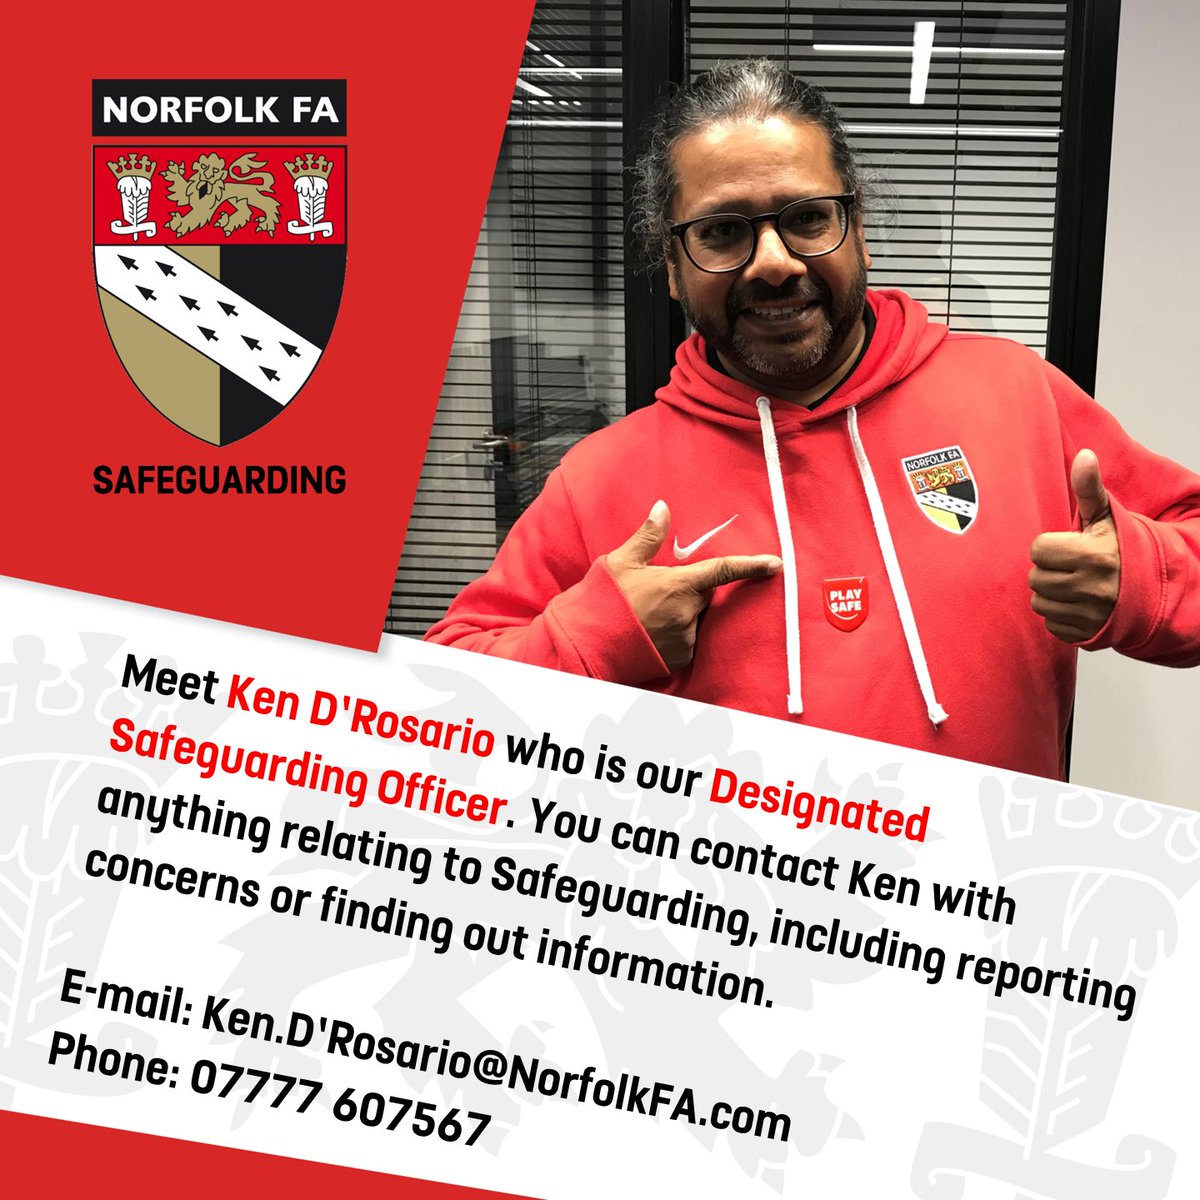 It is important to know both your Club Welfare Officer (CWO) and the County FA Designated Safeguarding Officer (DSO). Ken D’Rosario is Norfolk FA’s DSO and you can contact him with anything relating to Safeguarding, including reporting concerns or finding out information.